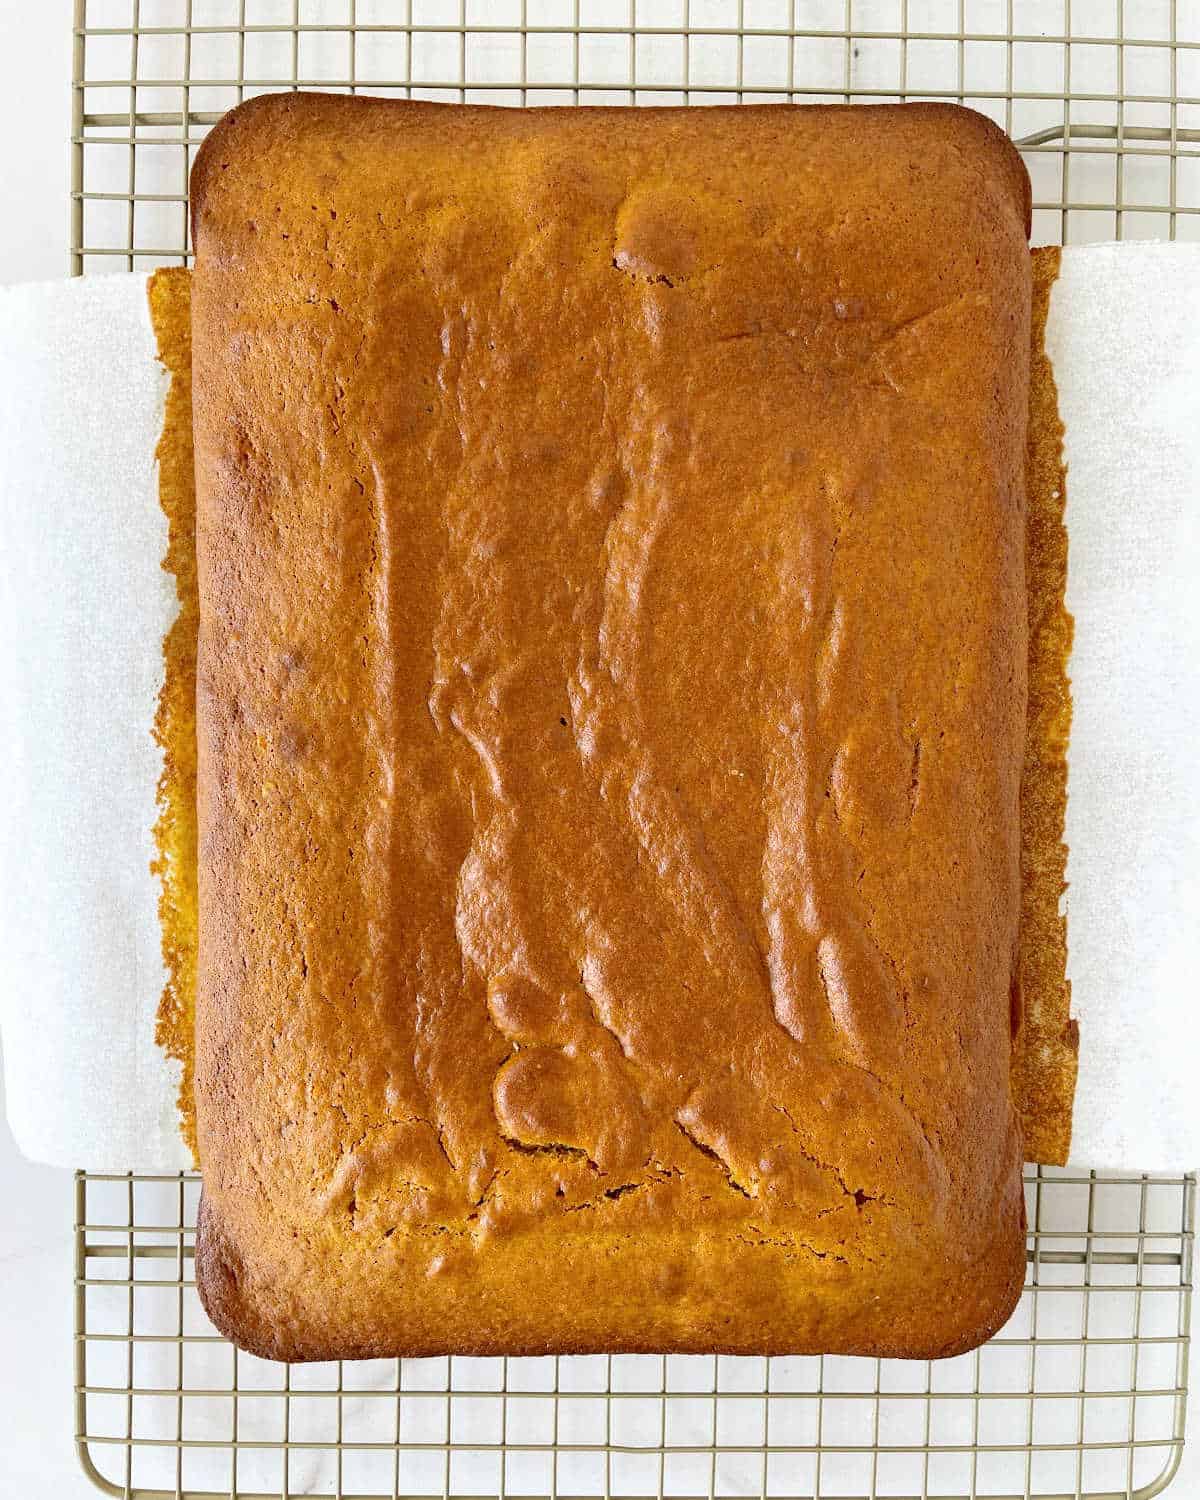 Baked pumpkin sheet cake on a wire rack. View from above.